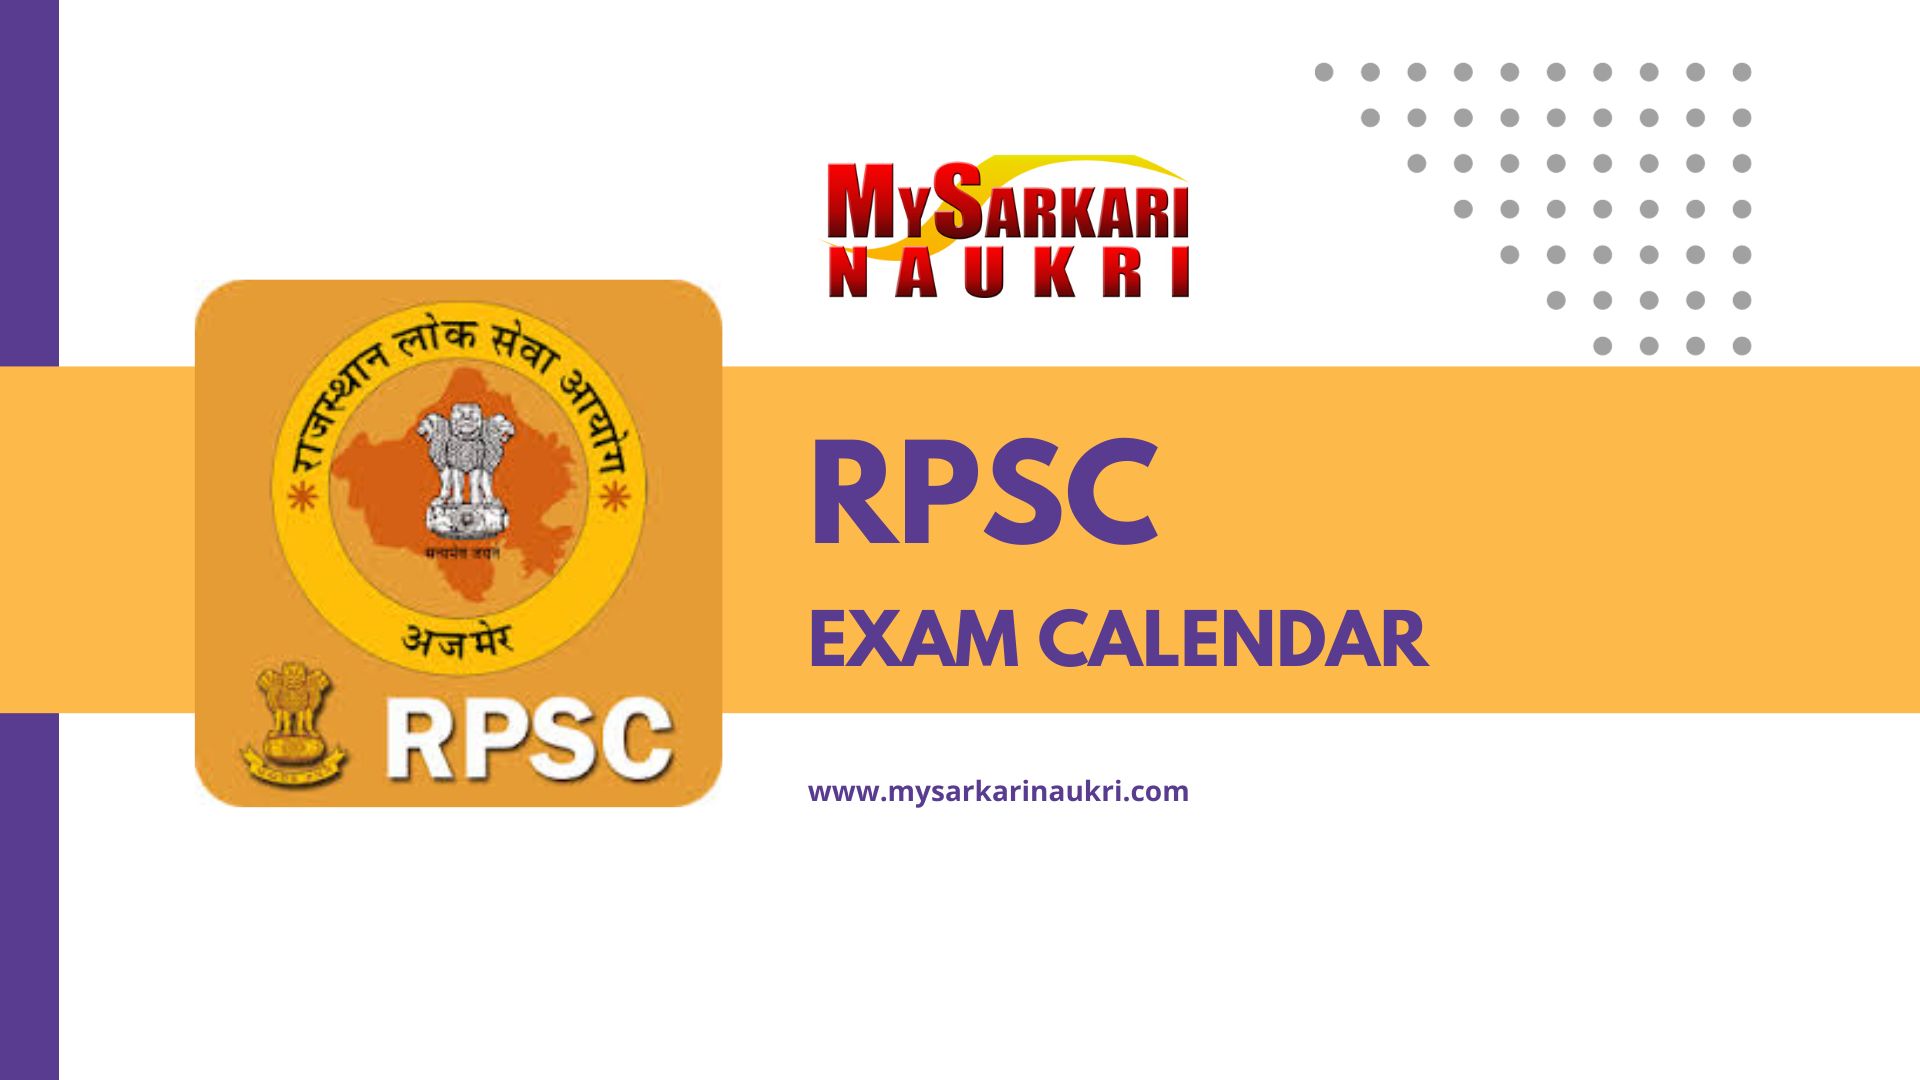 The RPSC Exam Calendar 2024 has been released, featuring the Rajasthan